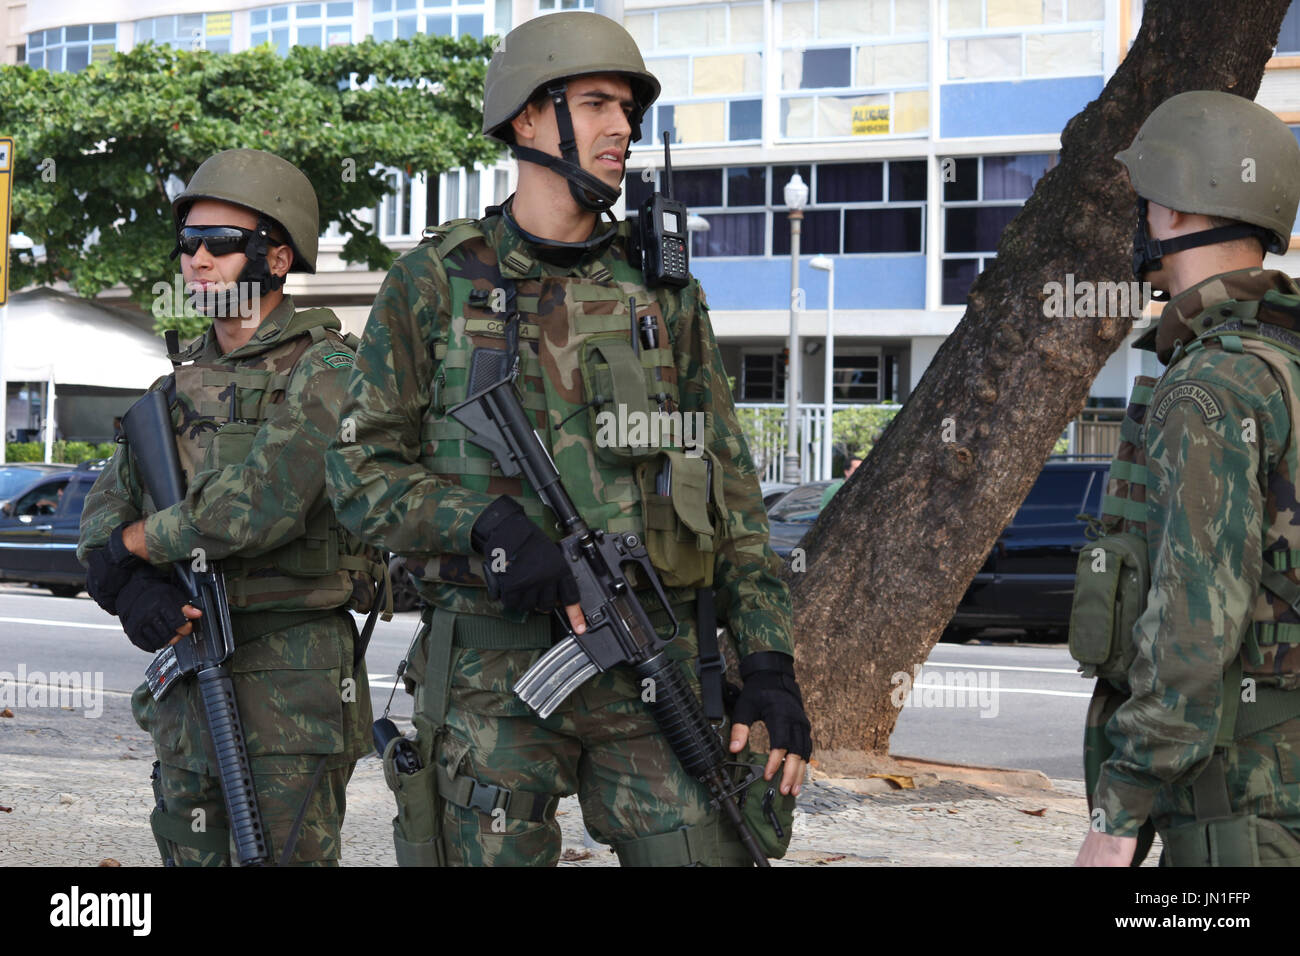 Rio de Janeiro, Brazil, July 29, 2017. Approximately 10,000 military personnel from the Navy, Army and Air Force were called in to strengthen security in Rio de Janeiro after the state completely lost control of public safety and reached alarming levels of crime. The military will do policing on expressways, favelas and tourist spots in the city. In this image: Marines patrol the edge of Copacabana Beach. Stock Photo